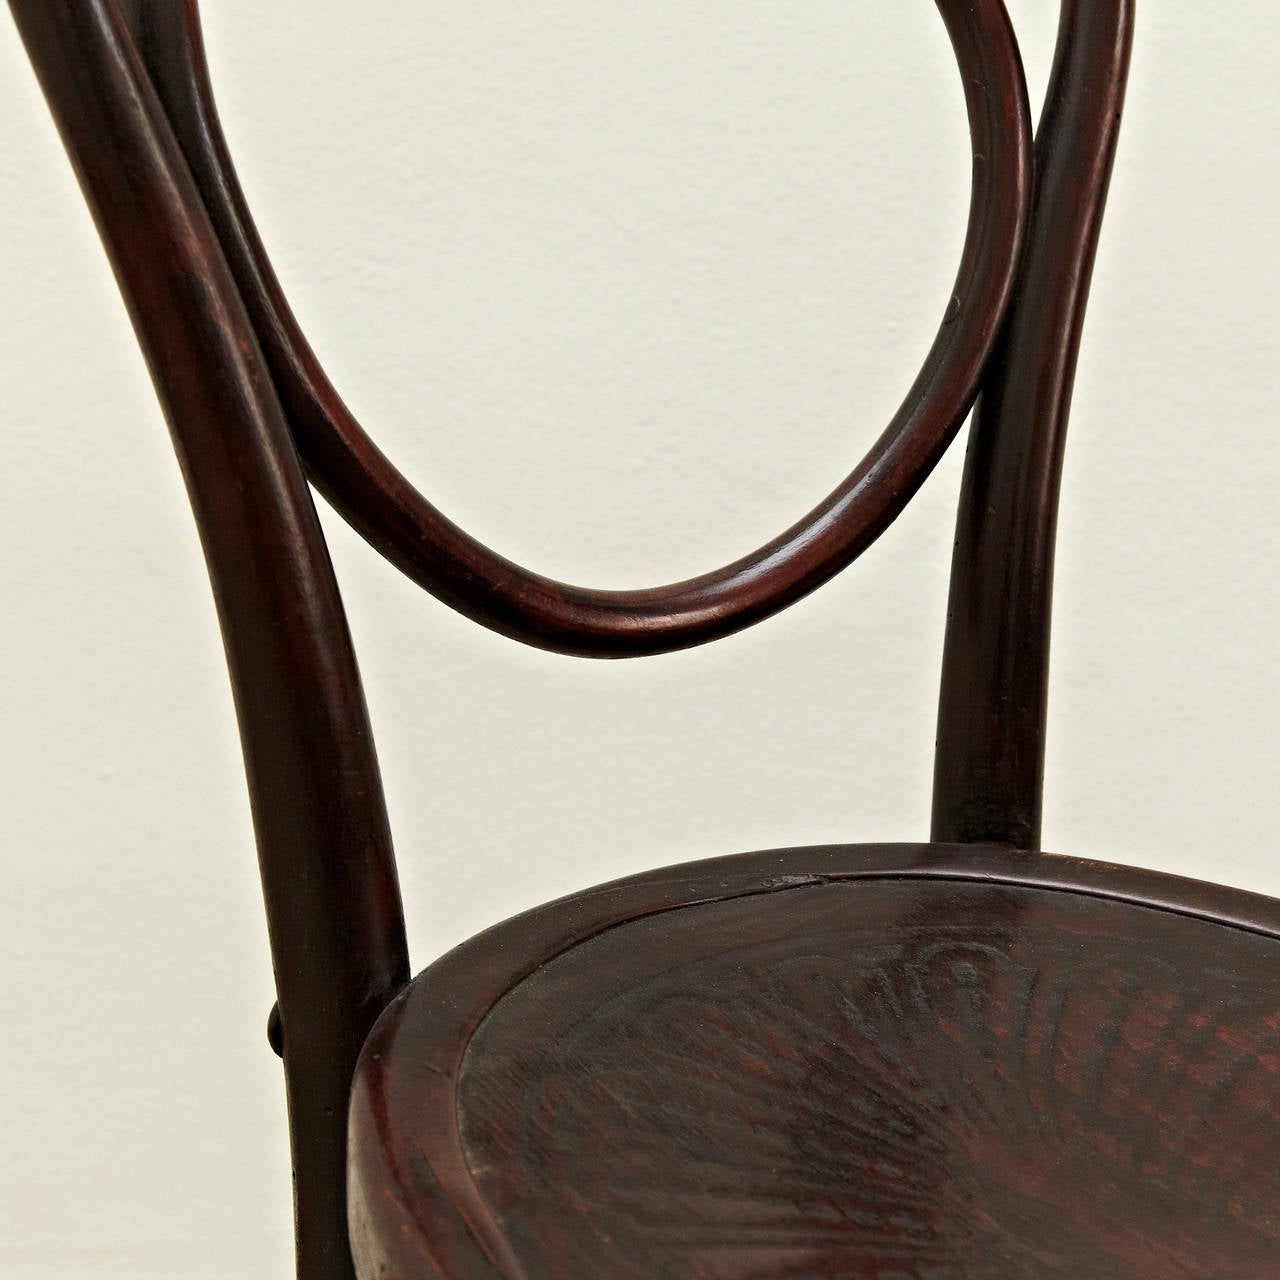 Rare J.J. Kohn bentwood chair, circa 1880, Austria

In great original condition, with minor wear consistent with age and use, preserving a beautiful patina.

Jacob & Josef Kohn, also known as J. & J. Kohn, was an Austrian furniture maker and